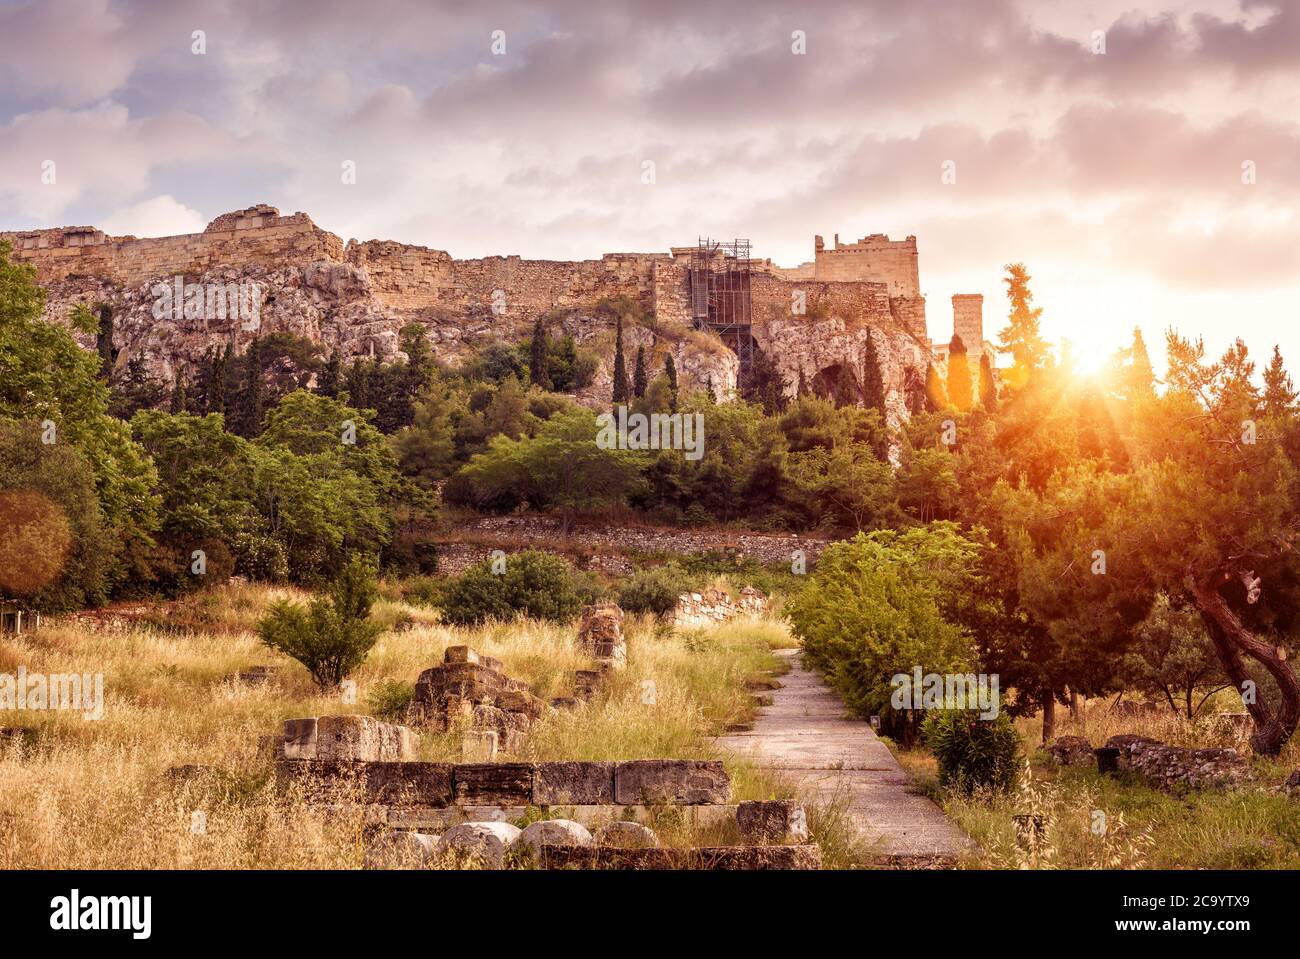 Landscape of Athens, Ancient Agora overlooking Acropolis hill at sunset, Greece. Scenic sunny view of classical Greek ruins in central Athens. Famous Stock Photo